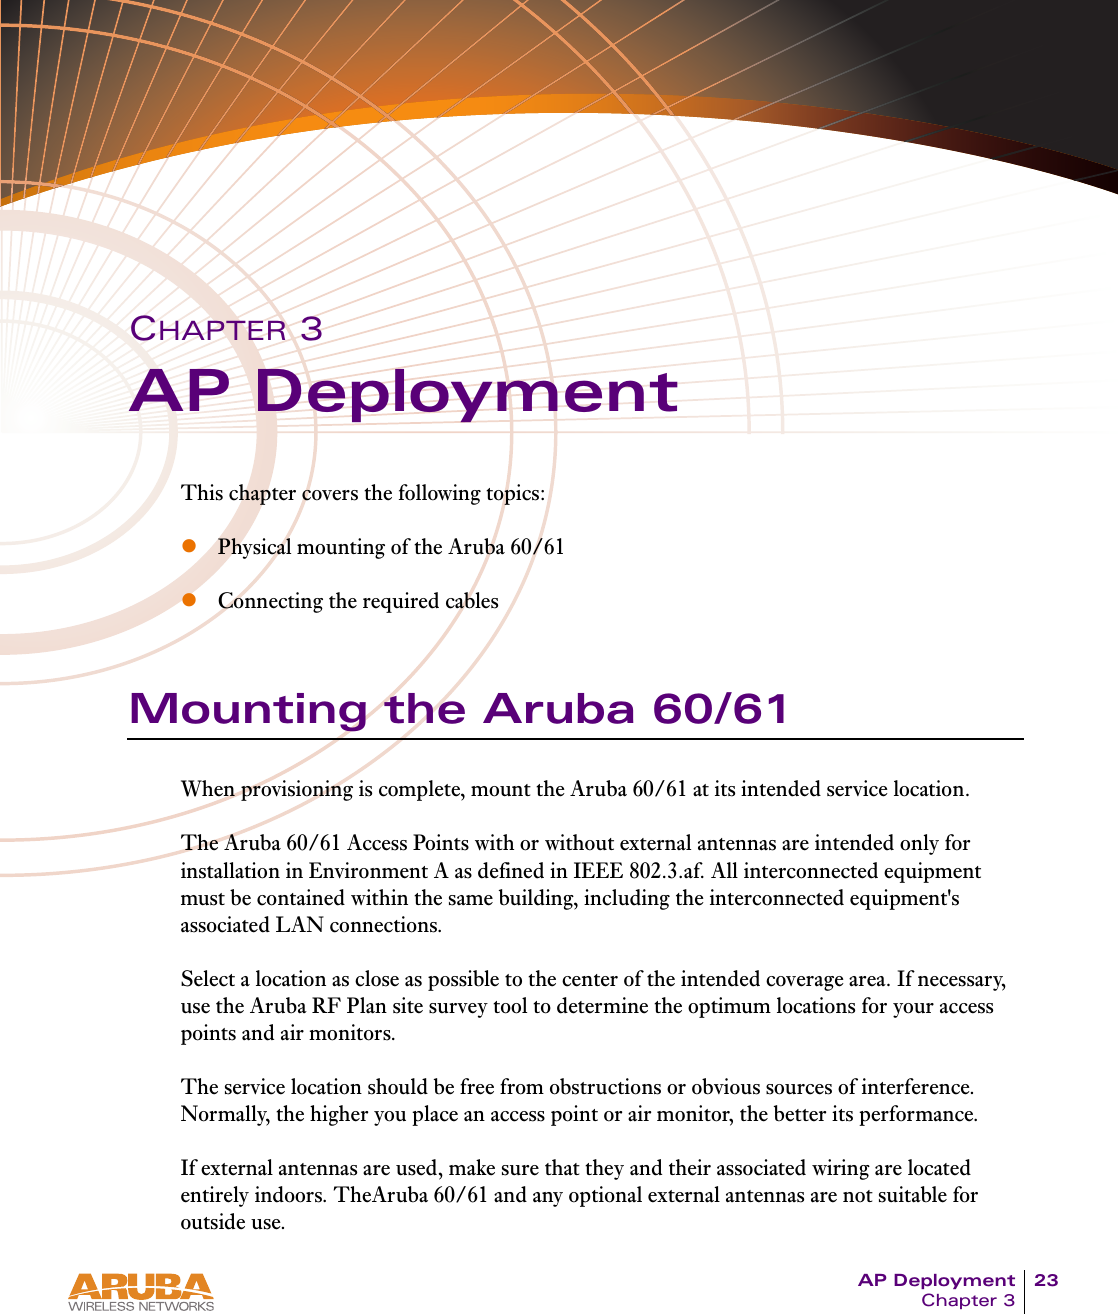 AP Deployment 23Chapter 3CHAPTER 3AP DeploymentThis chapter covers the following topics:zPhysical mounting of the Aruba 60/61zConnecting the required cablesMounting the Aruba 60/61When provisioning is complete, mount the Aruba 60/61 at its intended service location.The Aruba 60/61 Access Points with or without external antennas are intended only for installation in Environment A as defined in IEEE 802.3.af. All interconnected equipment must be contained within the same building, including the interconnected equipment&apos;s associated LAN connections.Select a location as close as possible to the center of the intended coverage area. If necessary, use the Aruba RF Plan site survey tool to determine the optimum locations for your access points and air monitors.The service location should be free from obstructions or obvious sources of interference. Normally, the higher you place an access point or air monitor, the better its performance.If external antennas are used, make sure that they and their associated wiring are located entirely indoors. TheAruba 60/61 and any optional external antennas are not suitable for outside use.